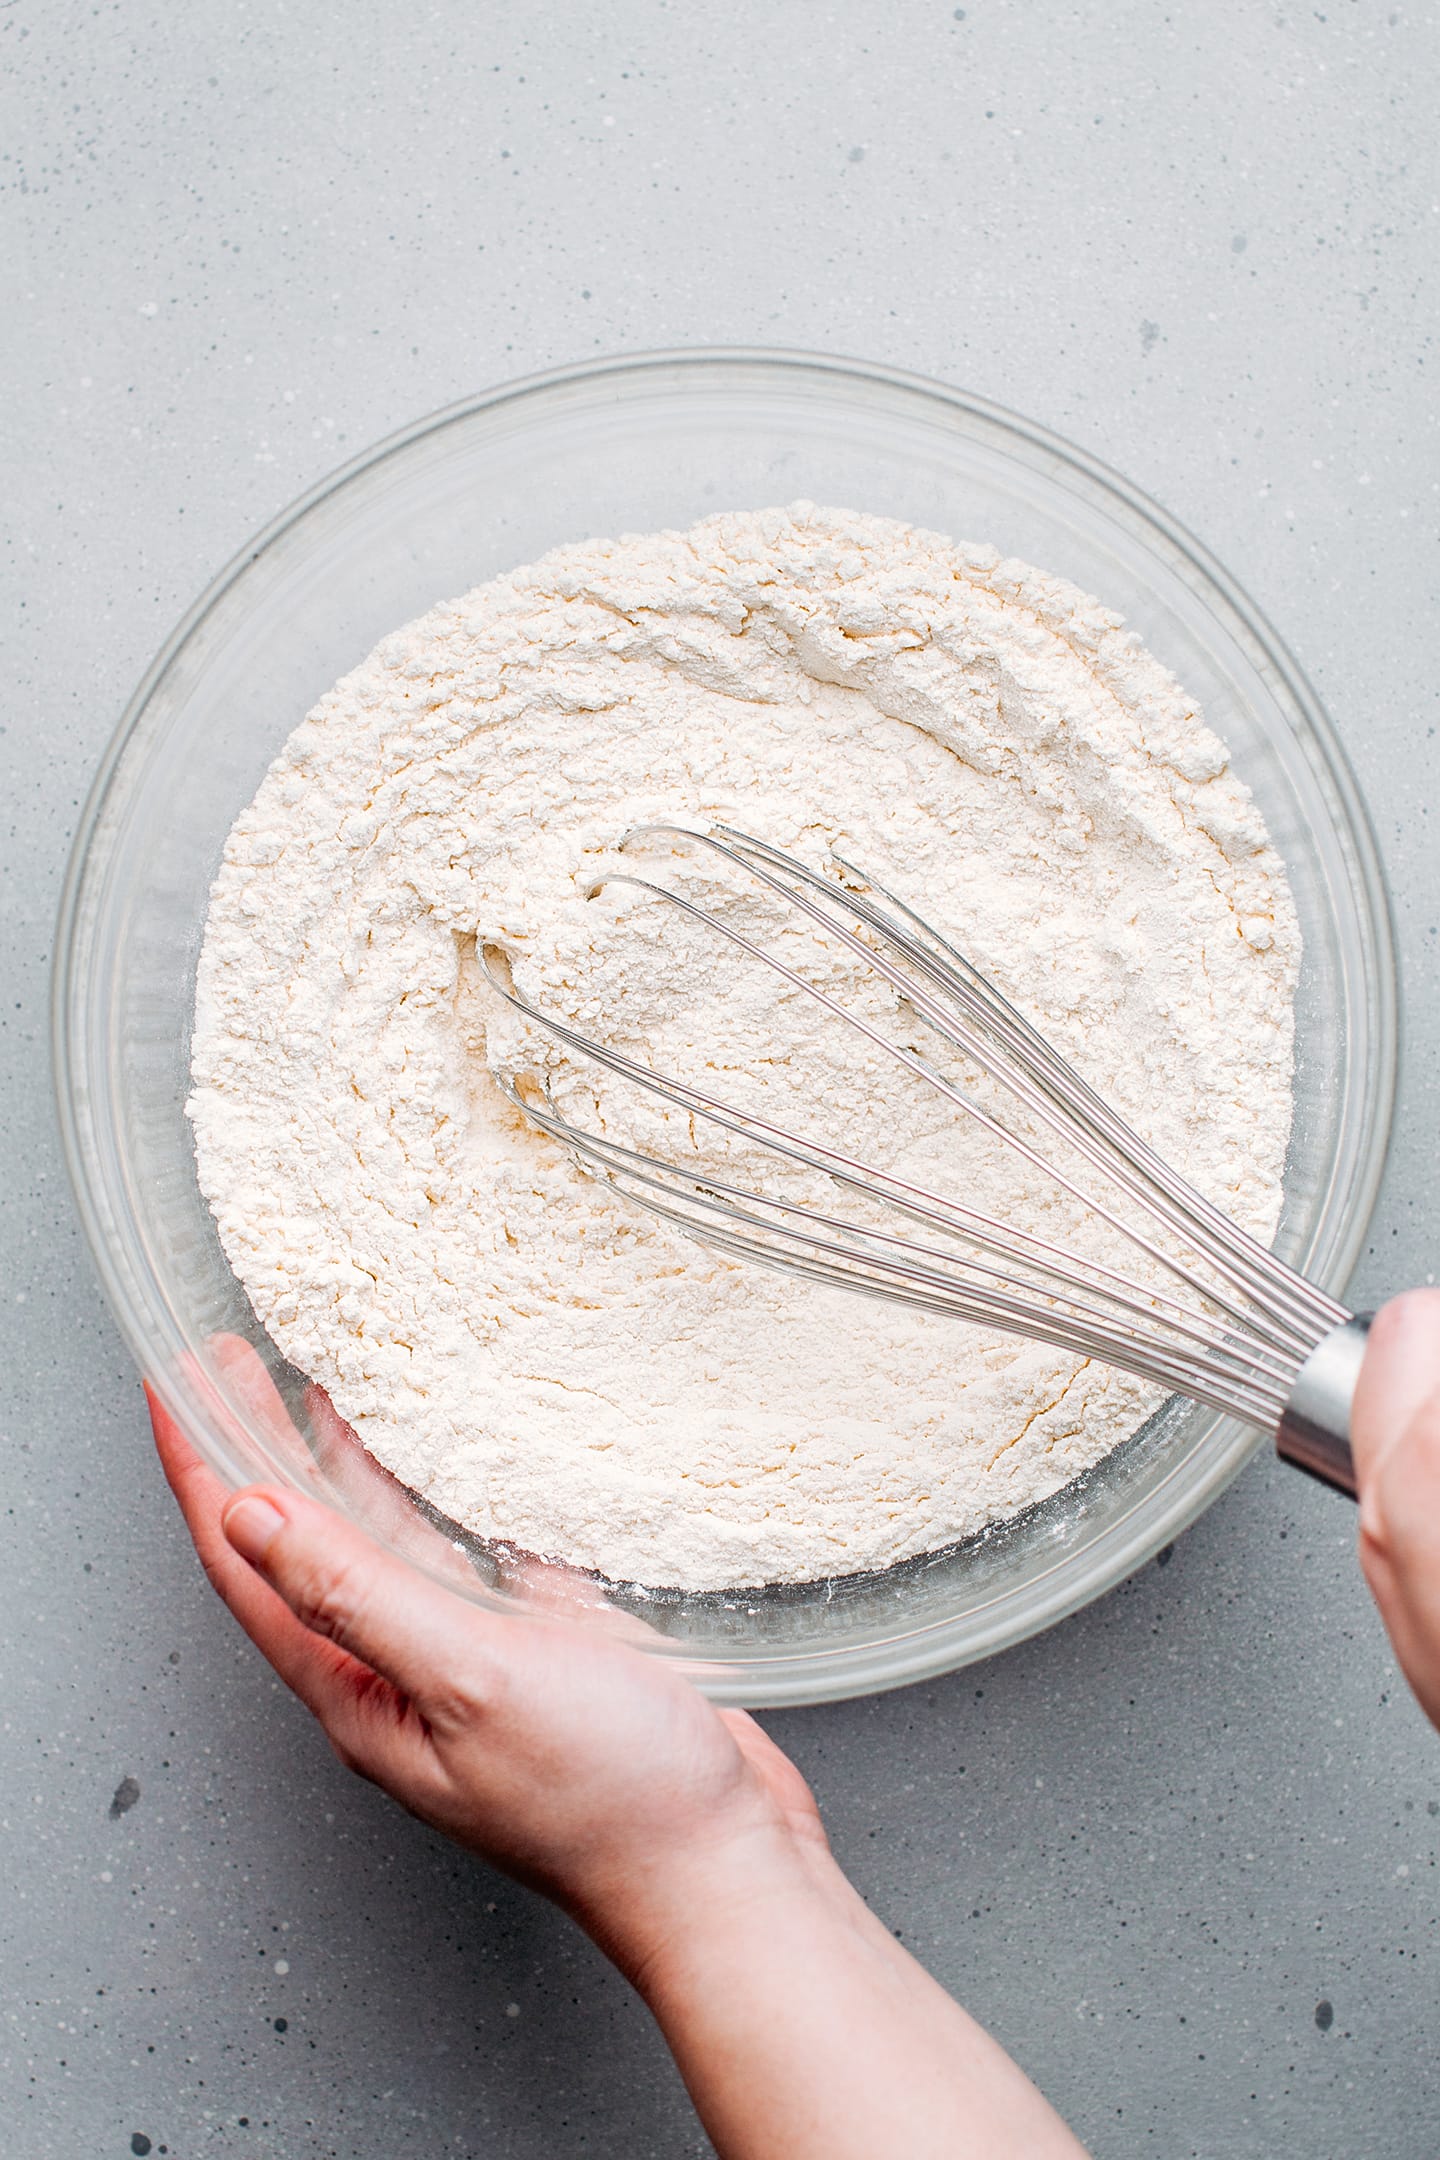 Whisking flour and sugar in a mixing bowl.